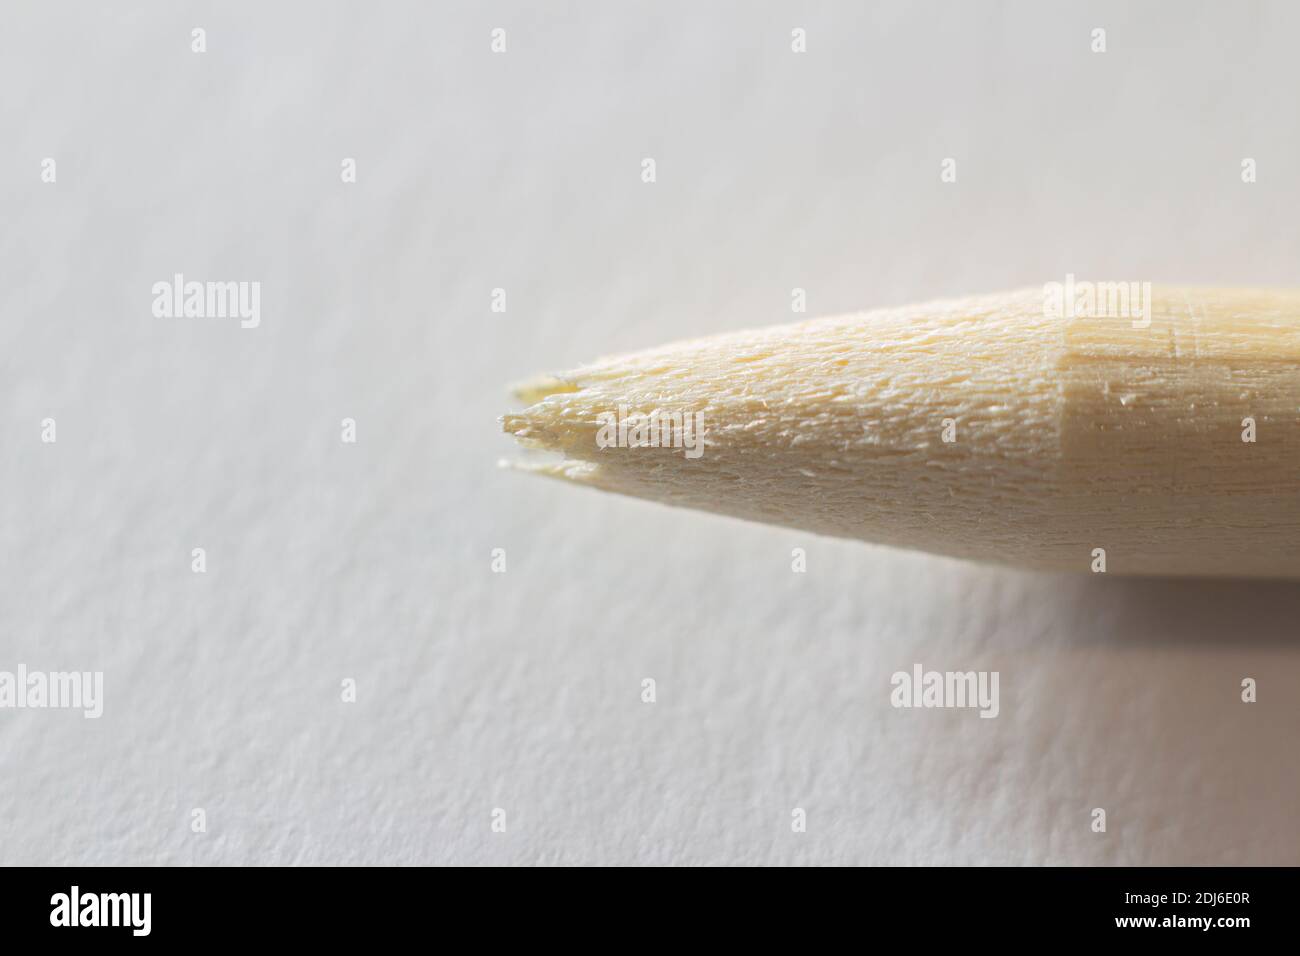 Closeup view of a broken pencil without lead rod on a white paper background Stock Photo